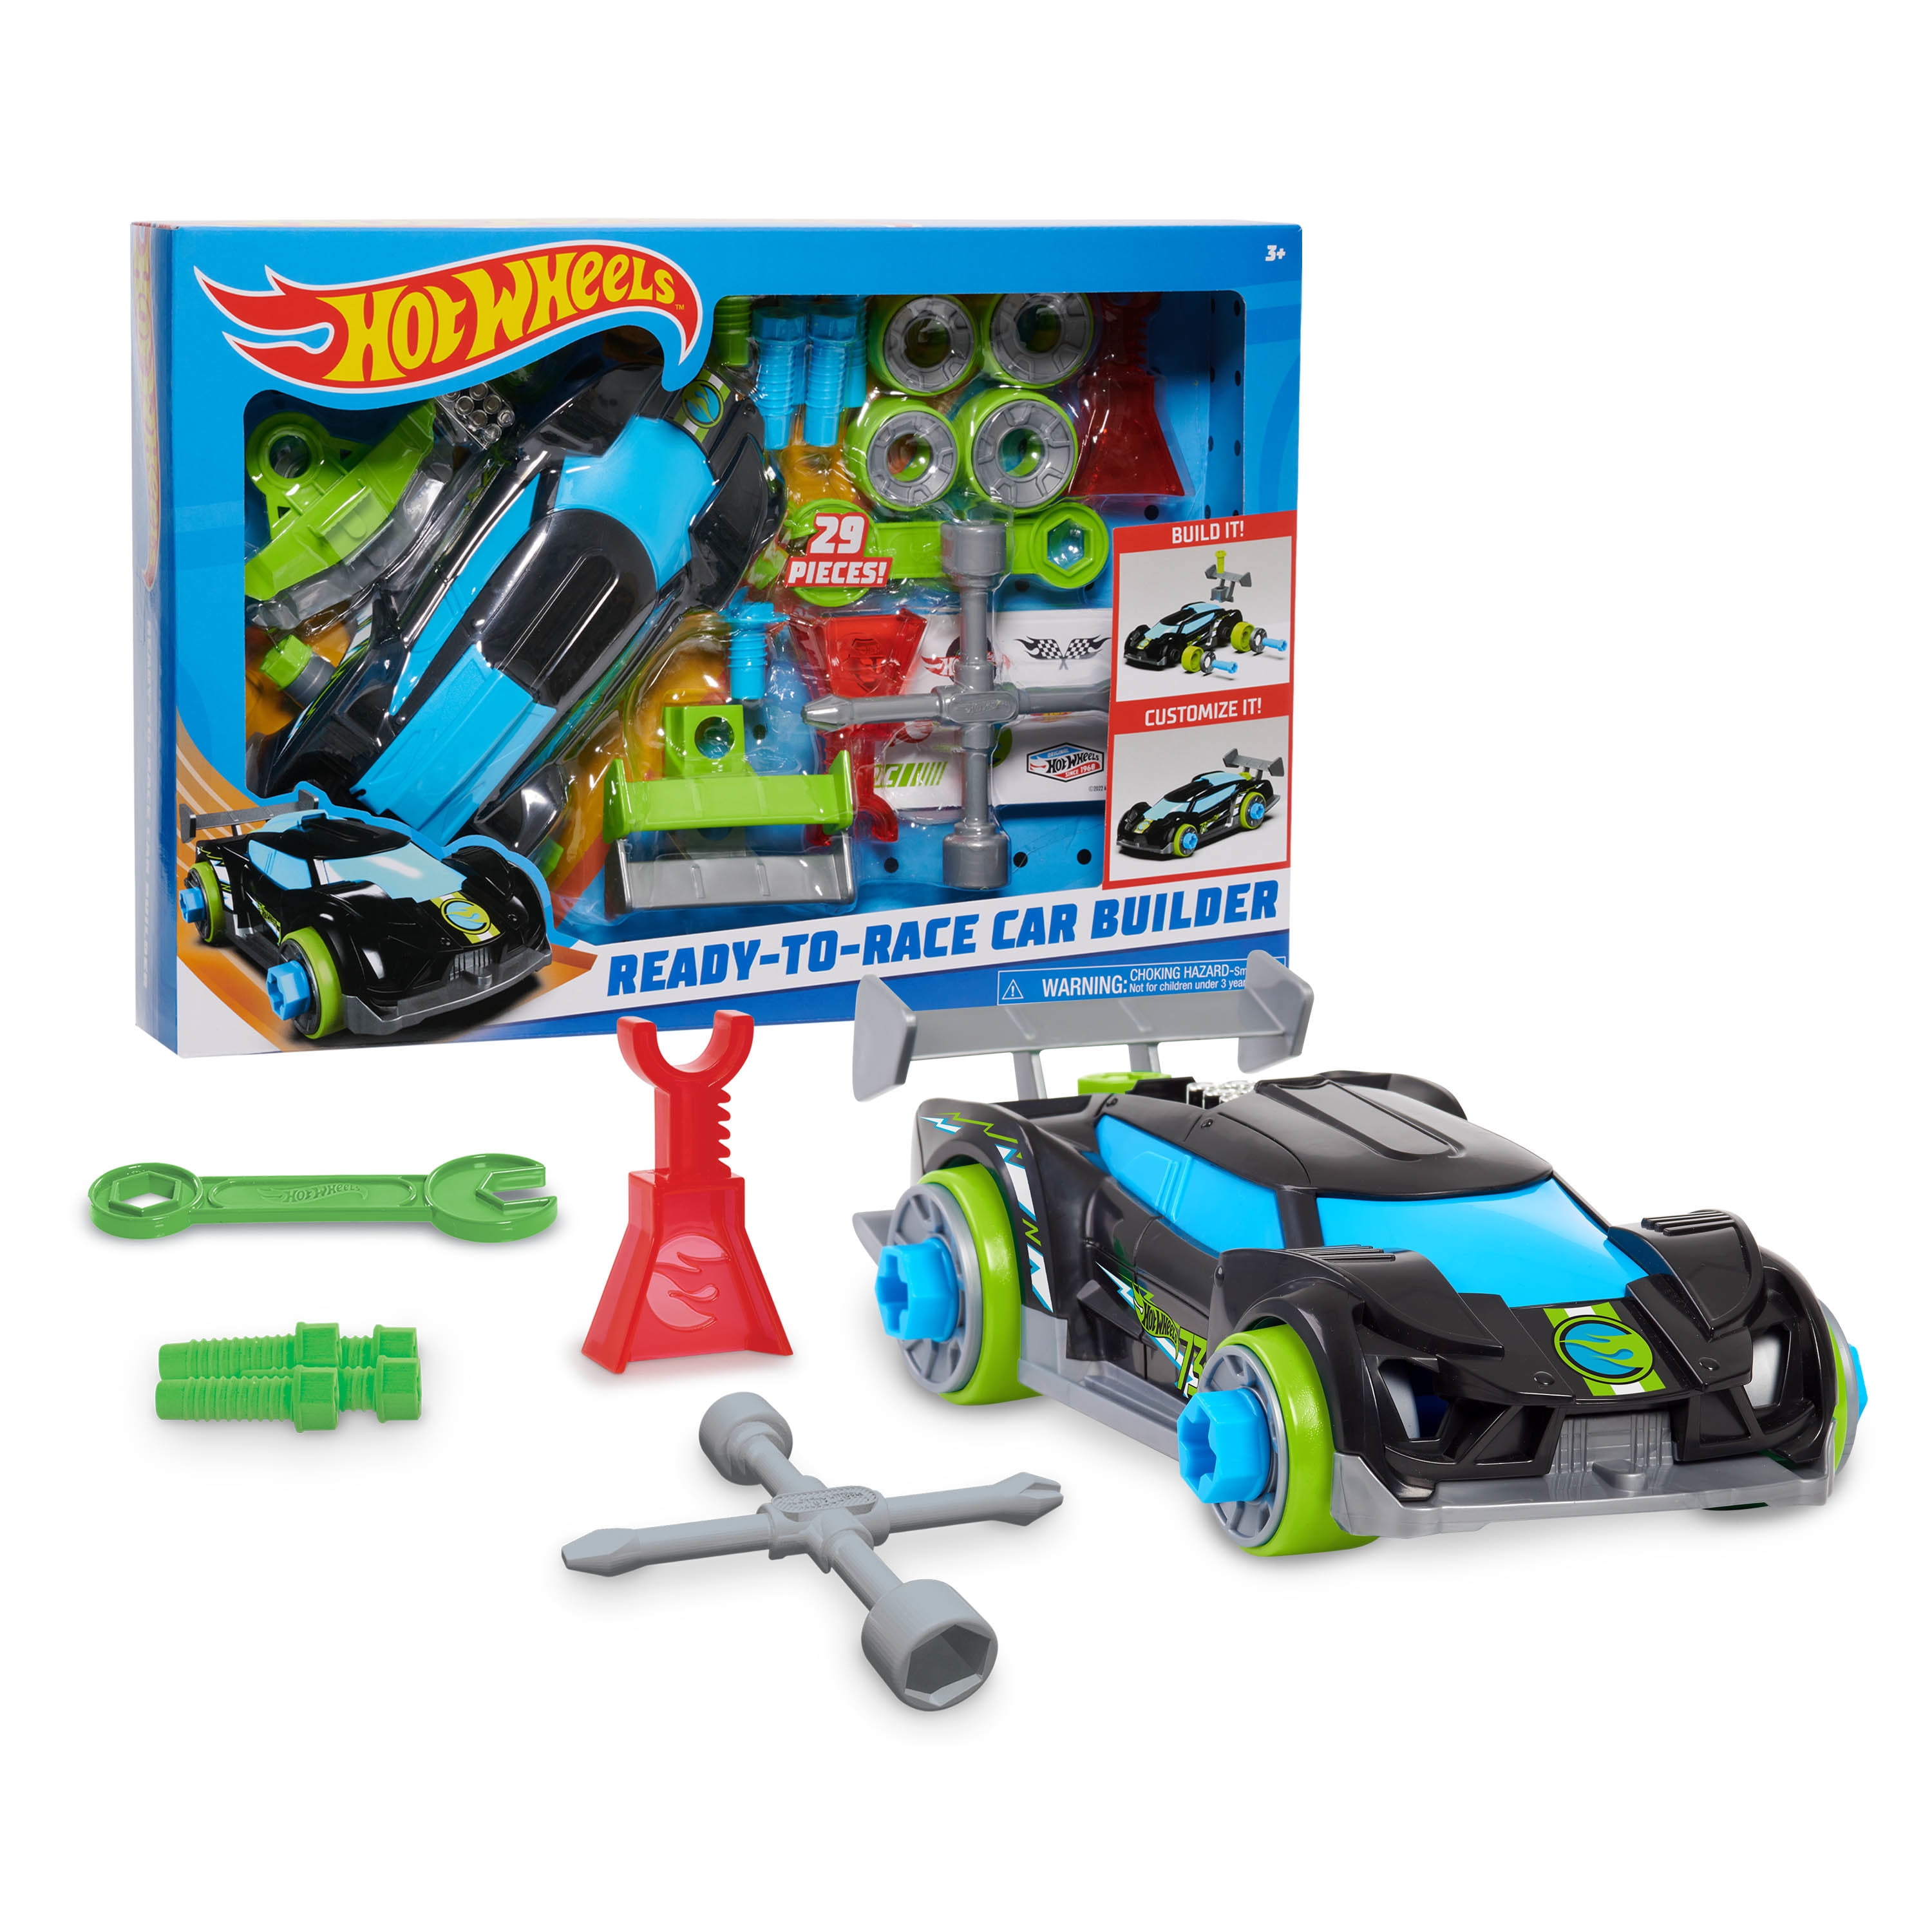 Hot Wheels Ready-to-Race Car Builder Set, Super Blitzen Vehicle,  Kids Toys for Ages 3 Up, Gifts and Presents